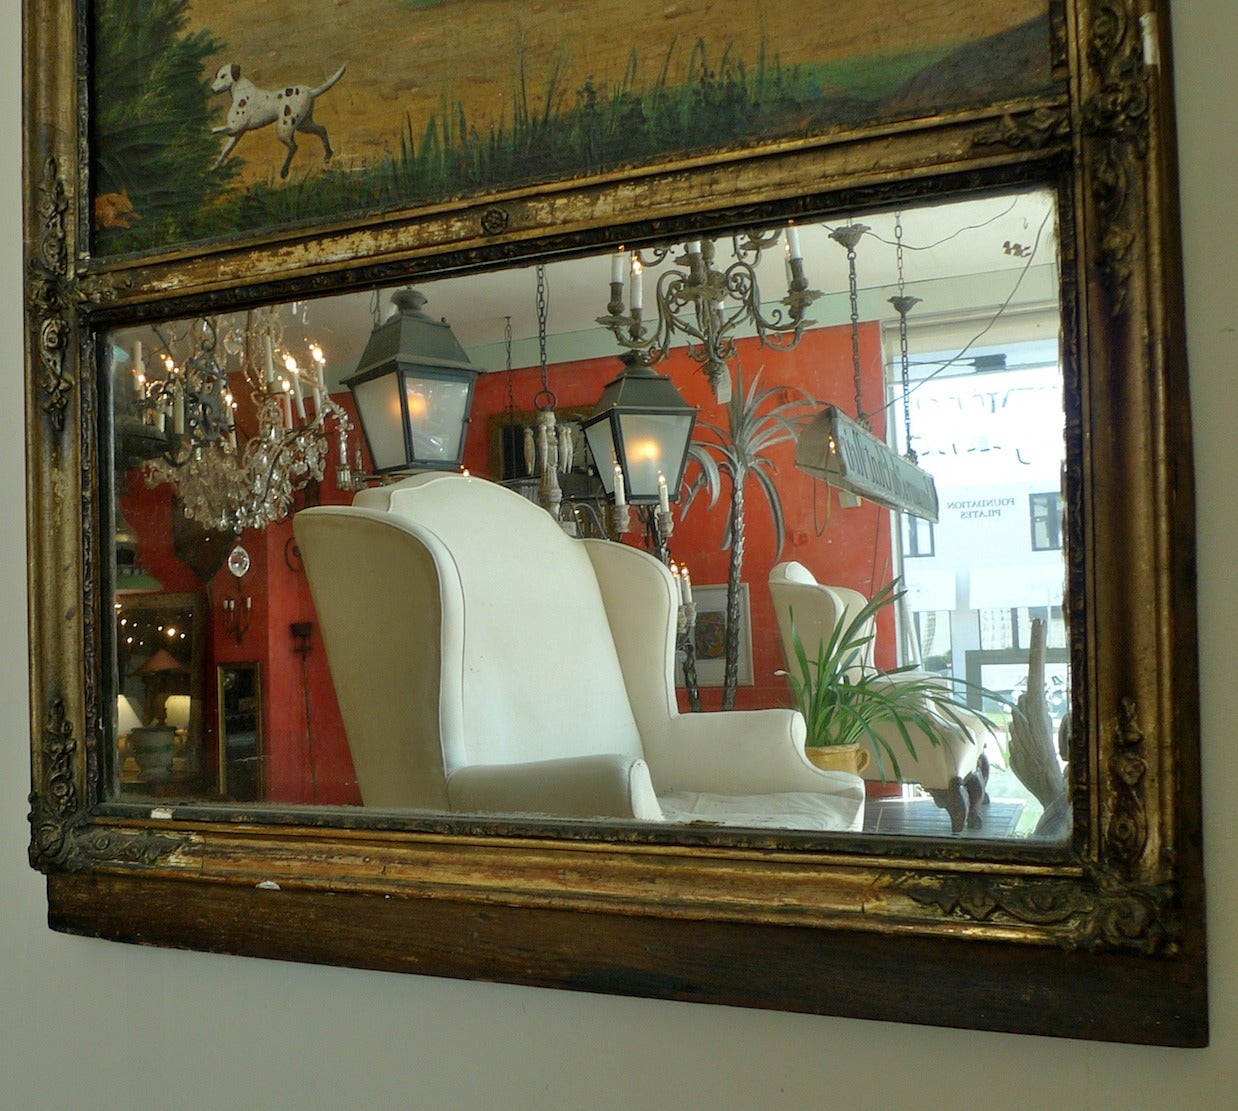 French, 19th century Louis XVI gold-leaf trumeau mirror with oil on canvas painting scene and original mirror glass.